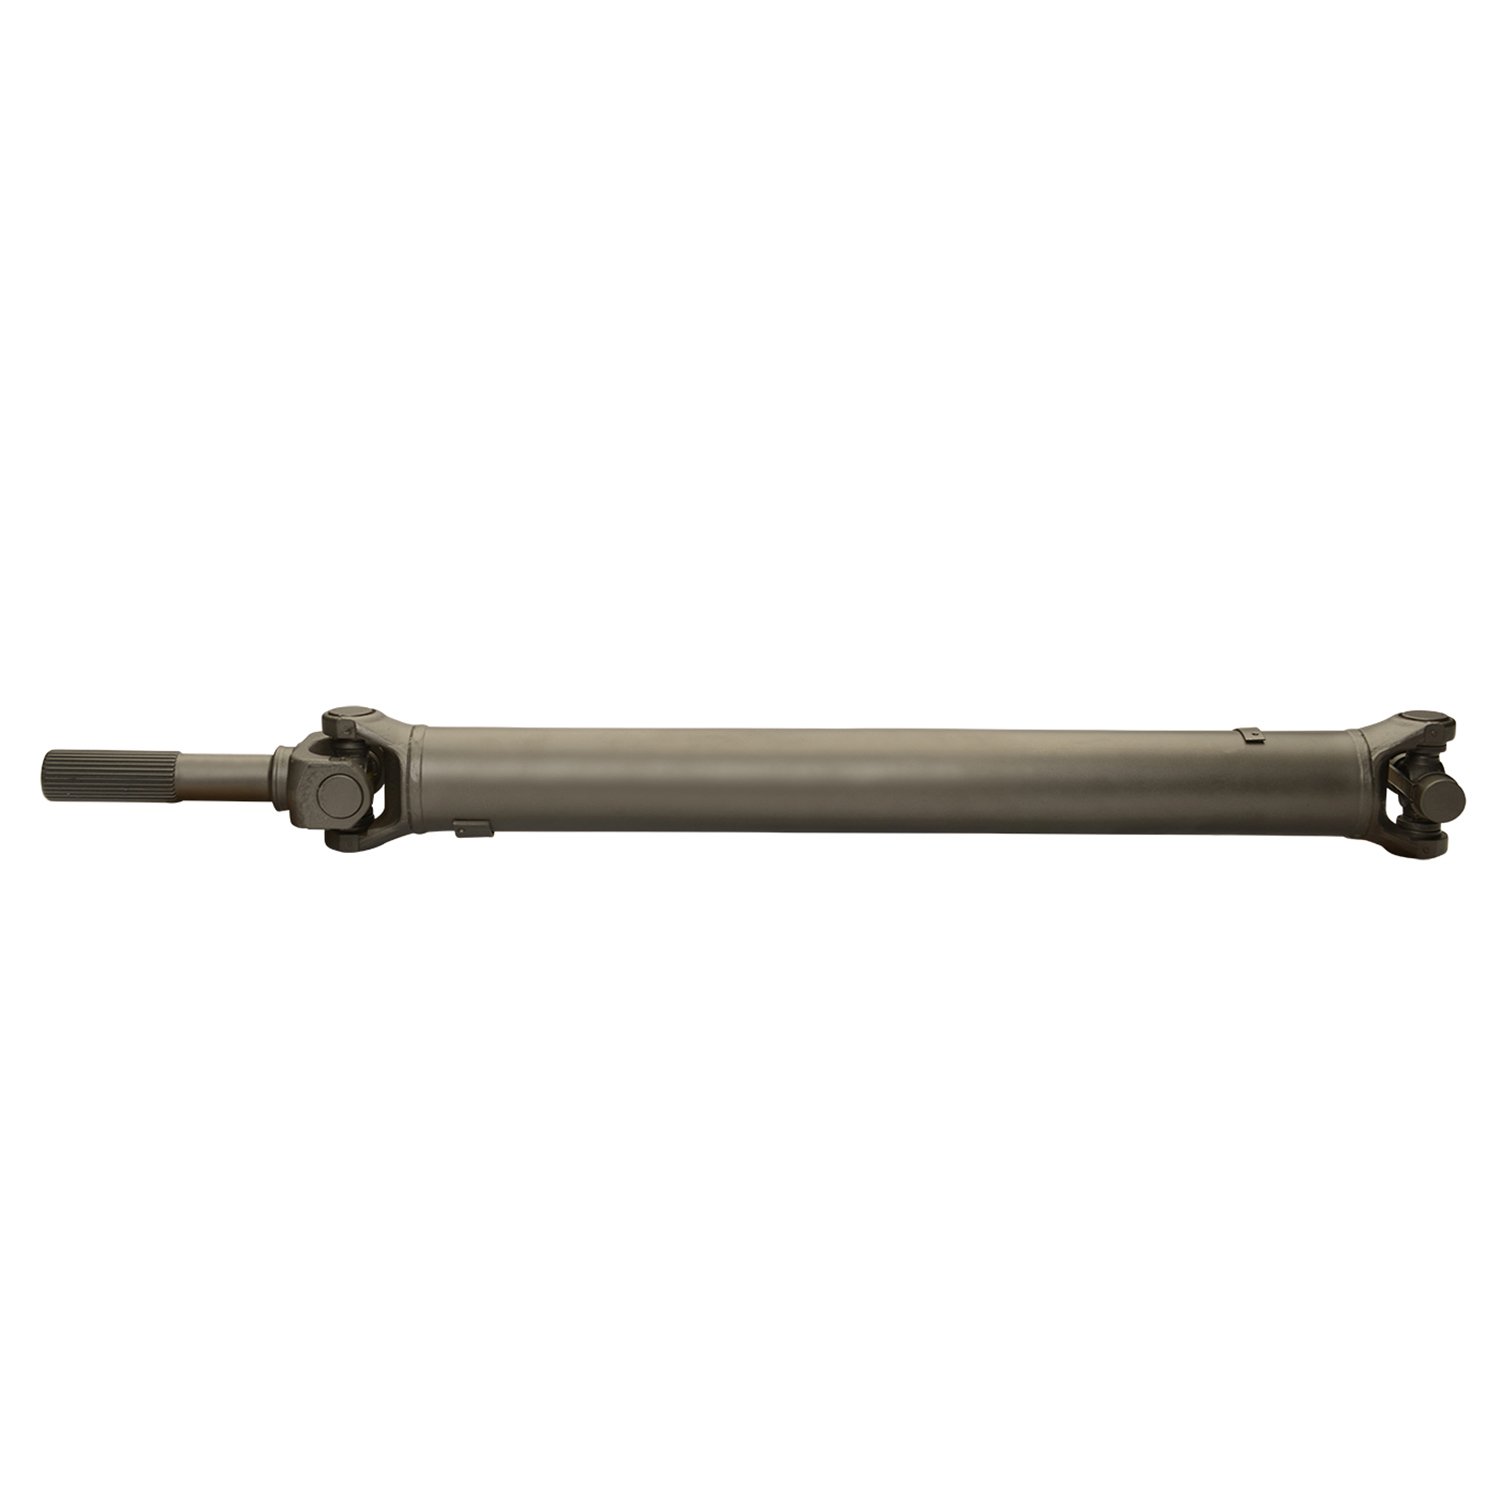 USA Standard ZDS9310 Front Driveshaft, For GM 2500 Truck & Suv, 29.25 in. Center-To-Center